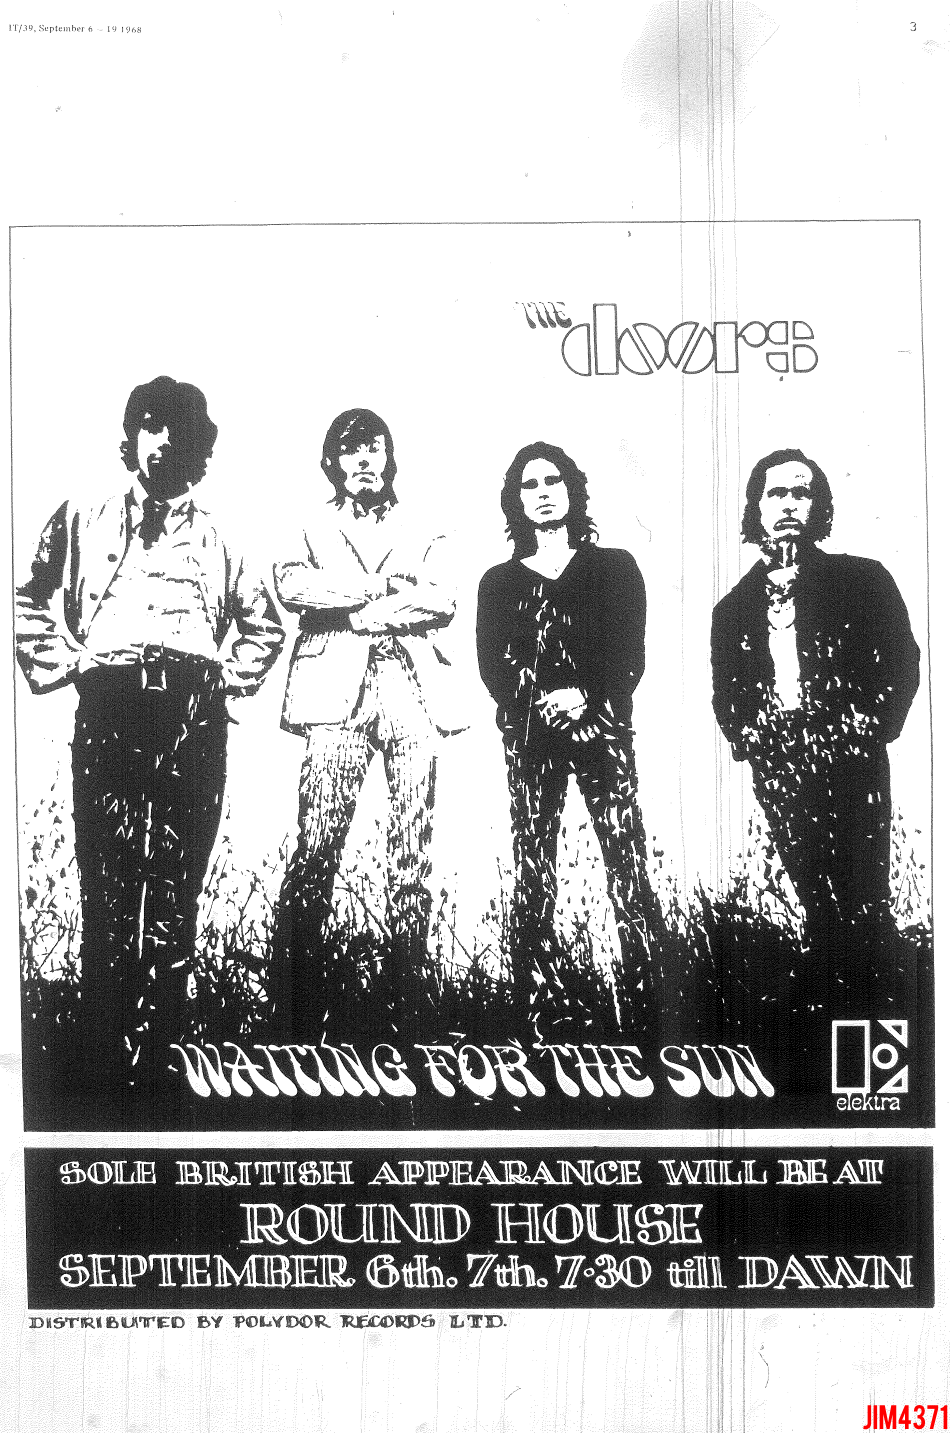 The Doors - Roundhouse 1968 - Poster Ad